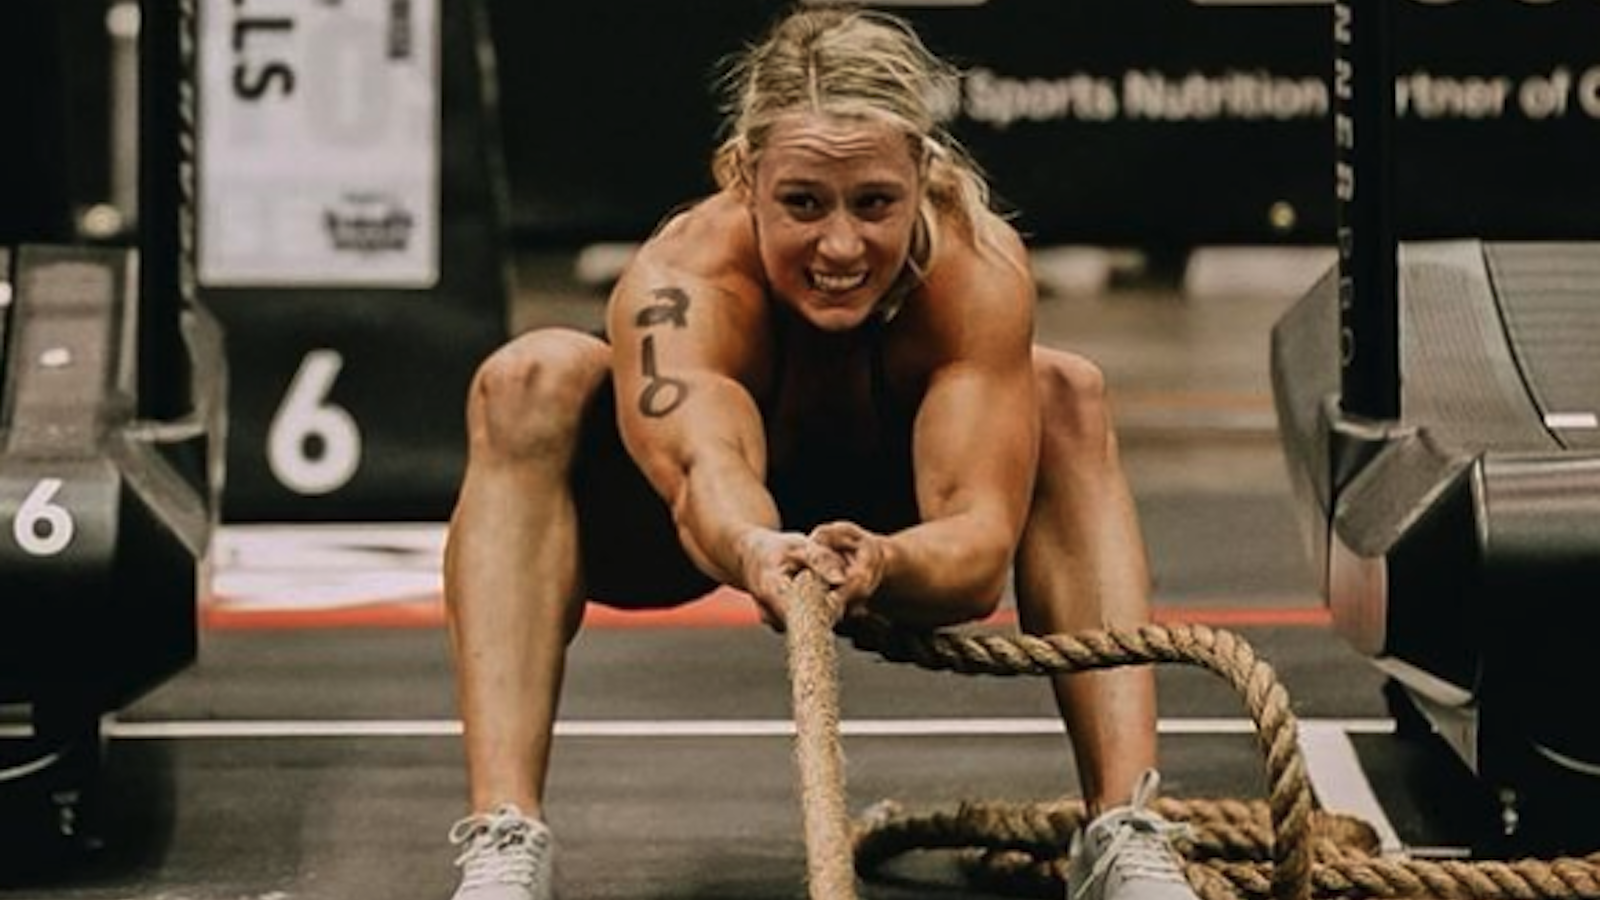 How Sydney Wells Trains for Her CrossFit Games Debut